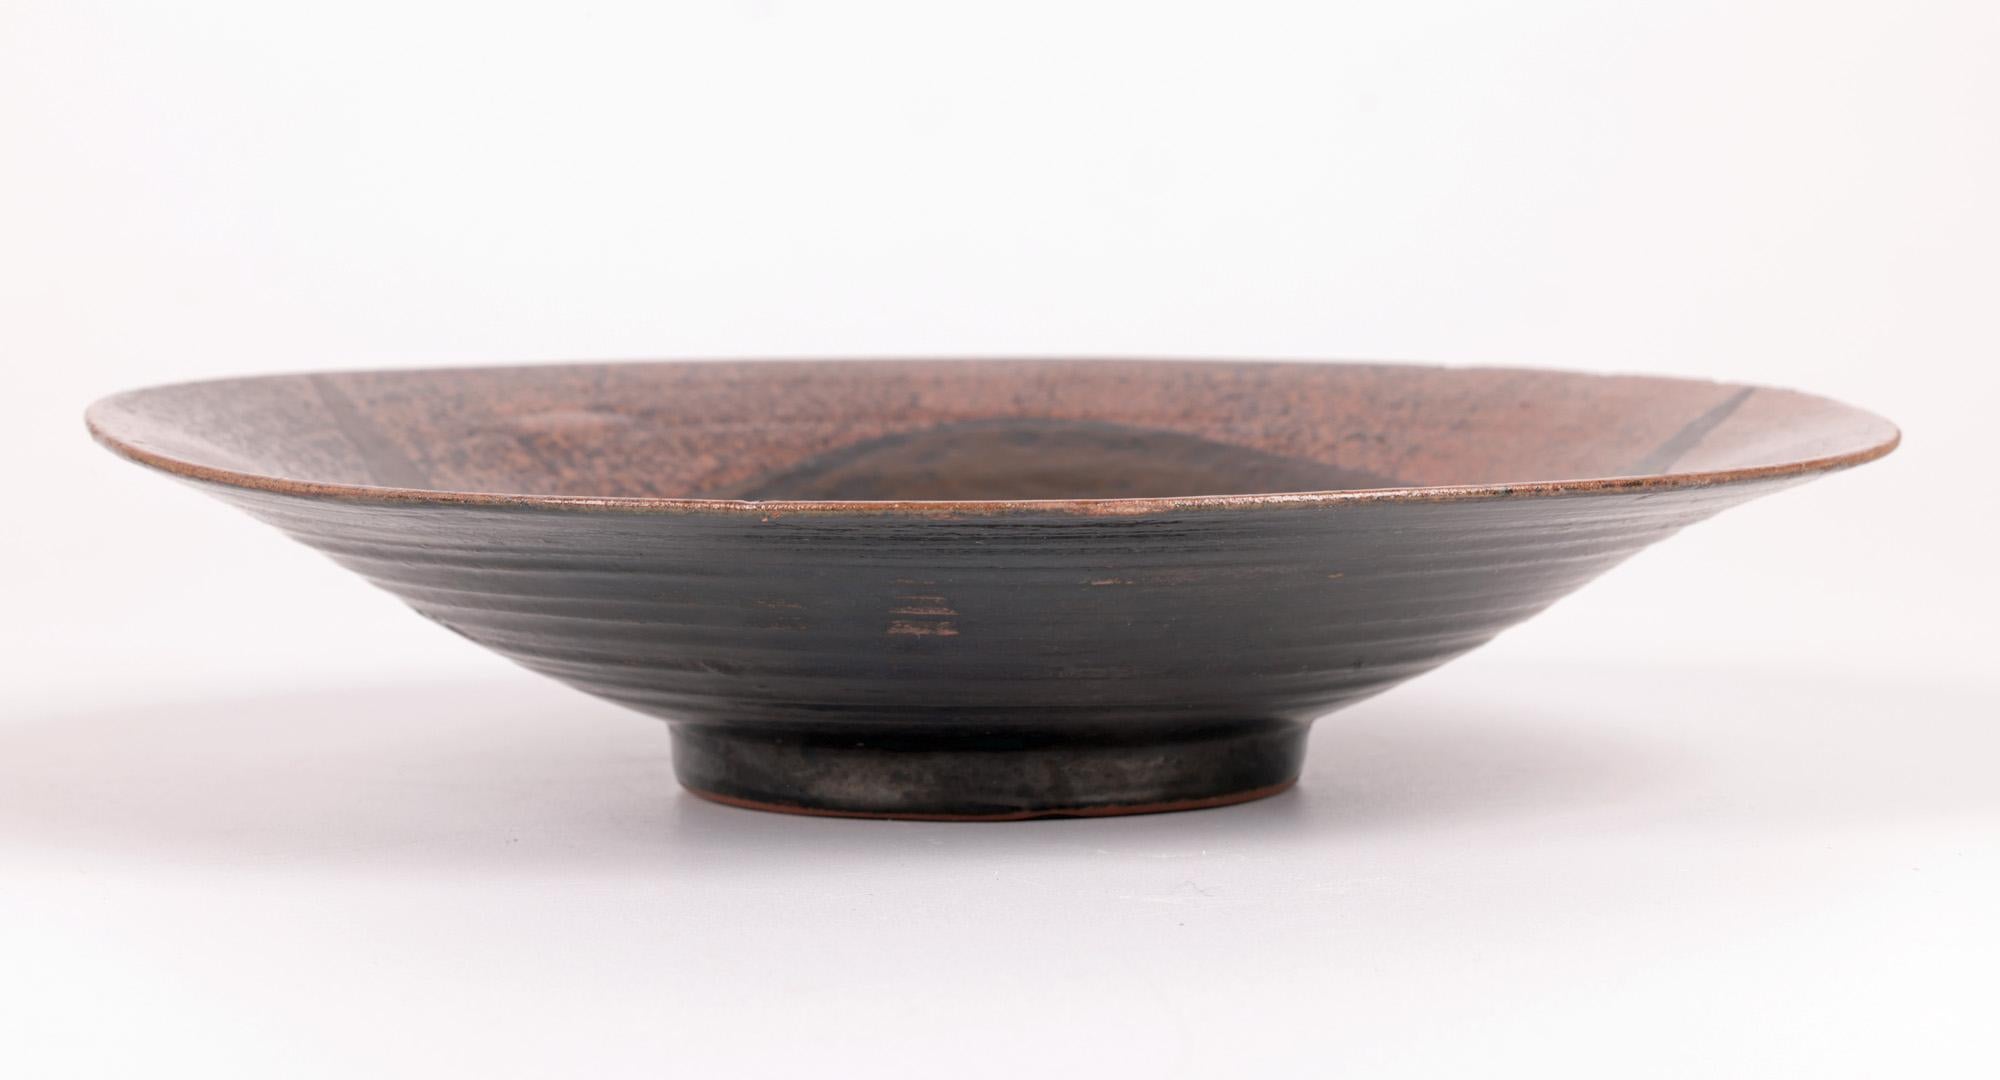 An unusual and very stylish German Bauhaus attributed ceramic glazed bowl or plaque made between 1930 and 1950. The bowl is lightly hand crafted in a red terracotta earthenware and stands raised on a narrow round foot with a splayed wide round